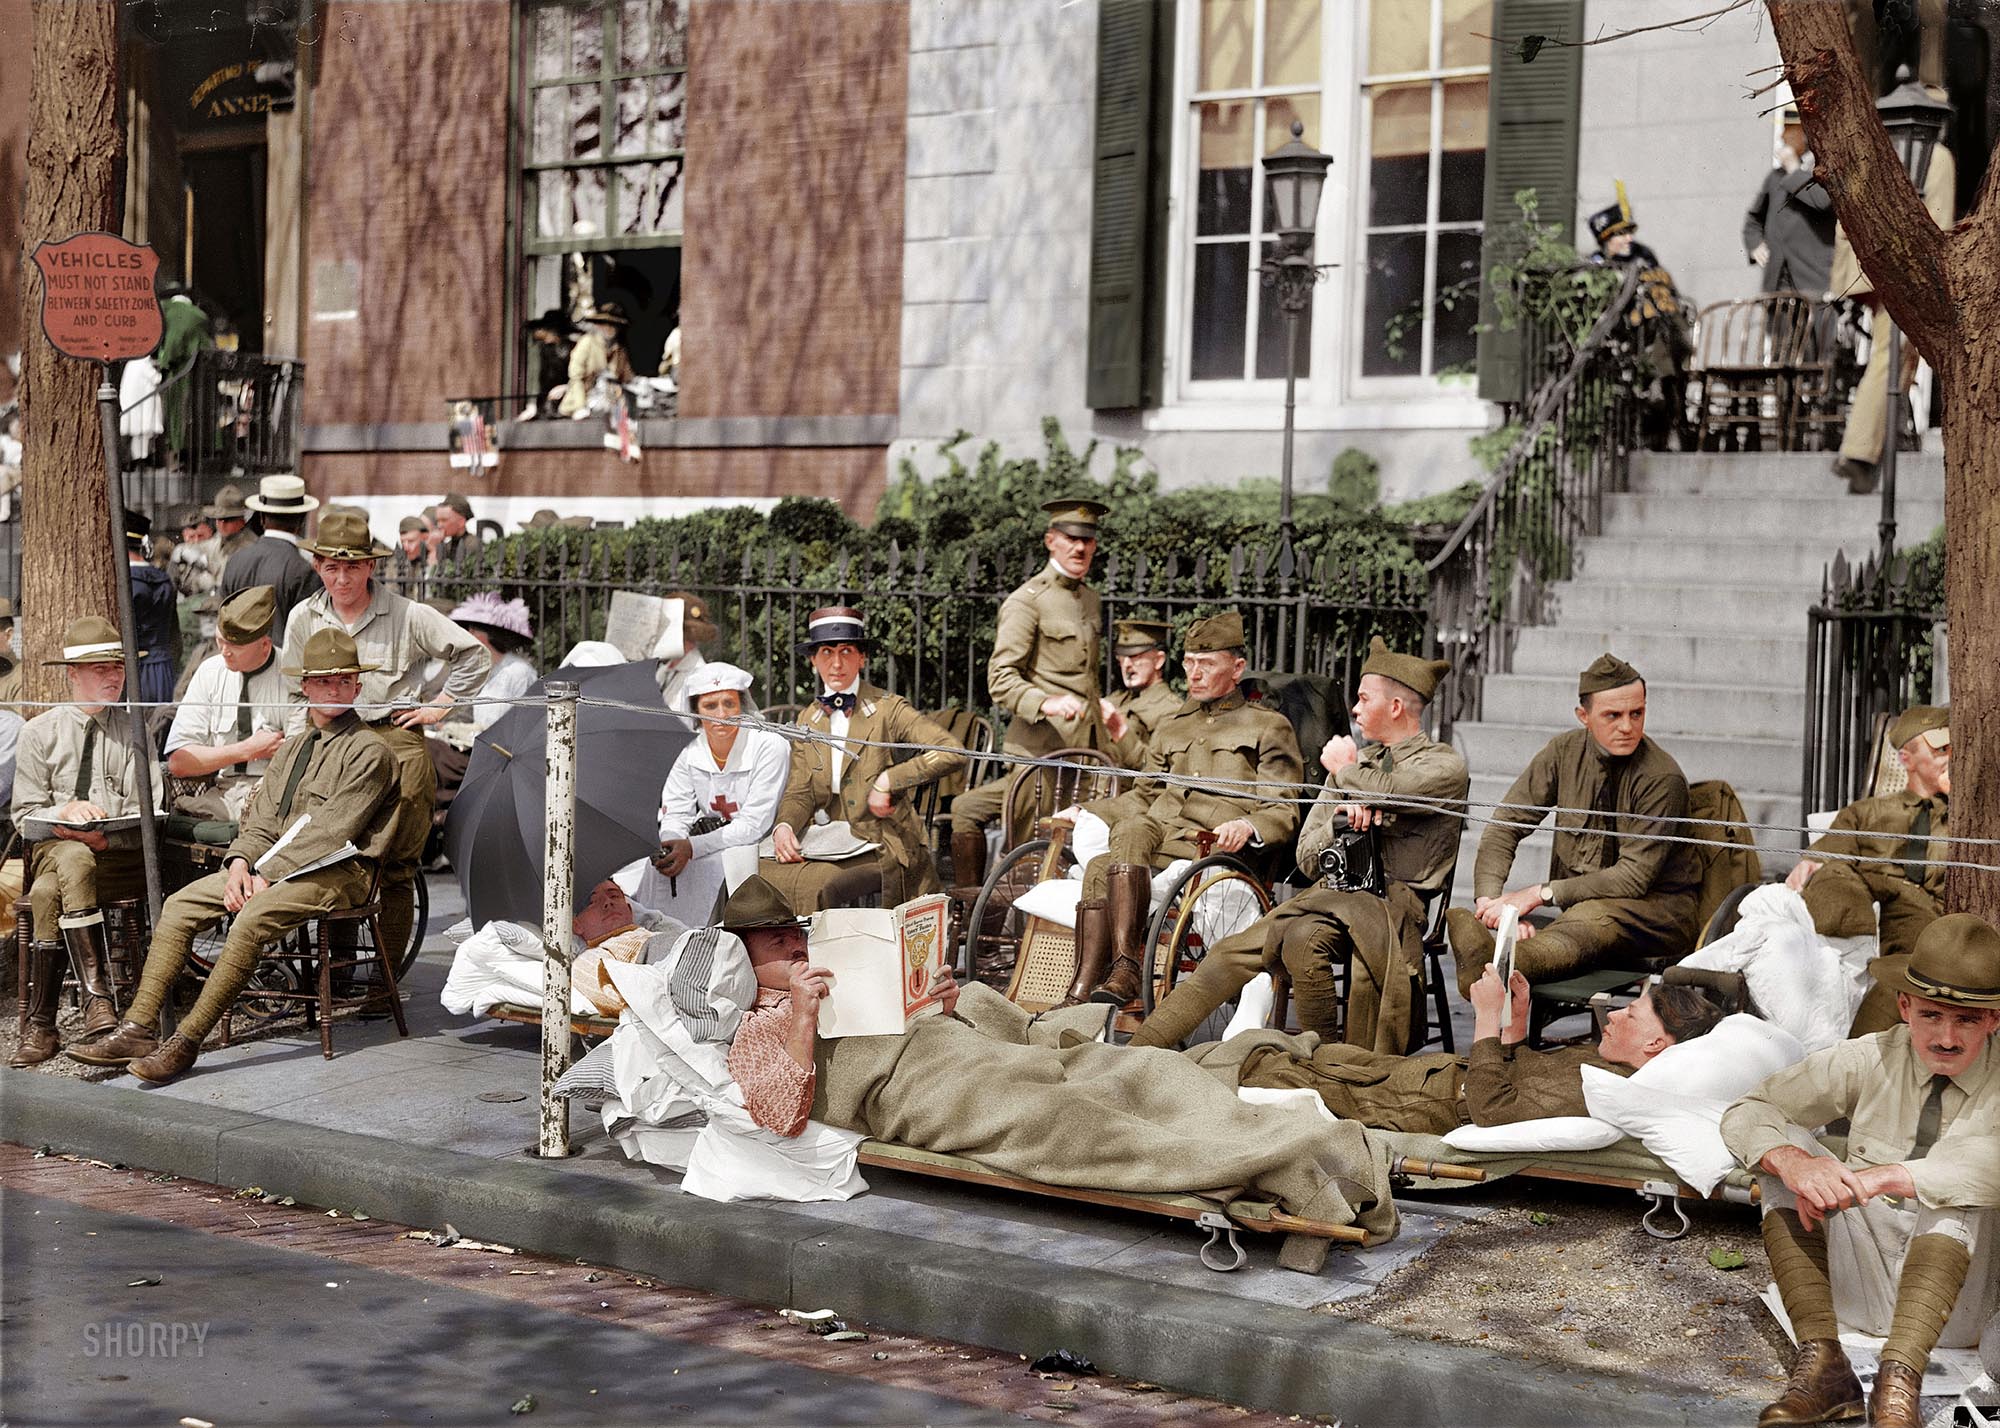 Wounded veterans of the 1st Division, American Expeditionary Forces, prepare to watch the Washington, D.C. victory parade, September 17, 1919. Colorized version of this Shorpy photo.